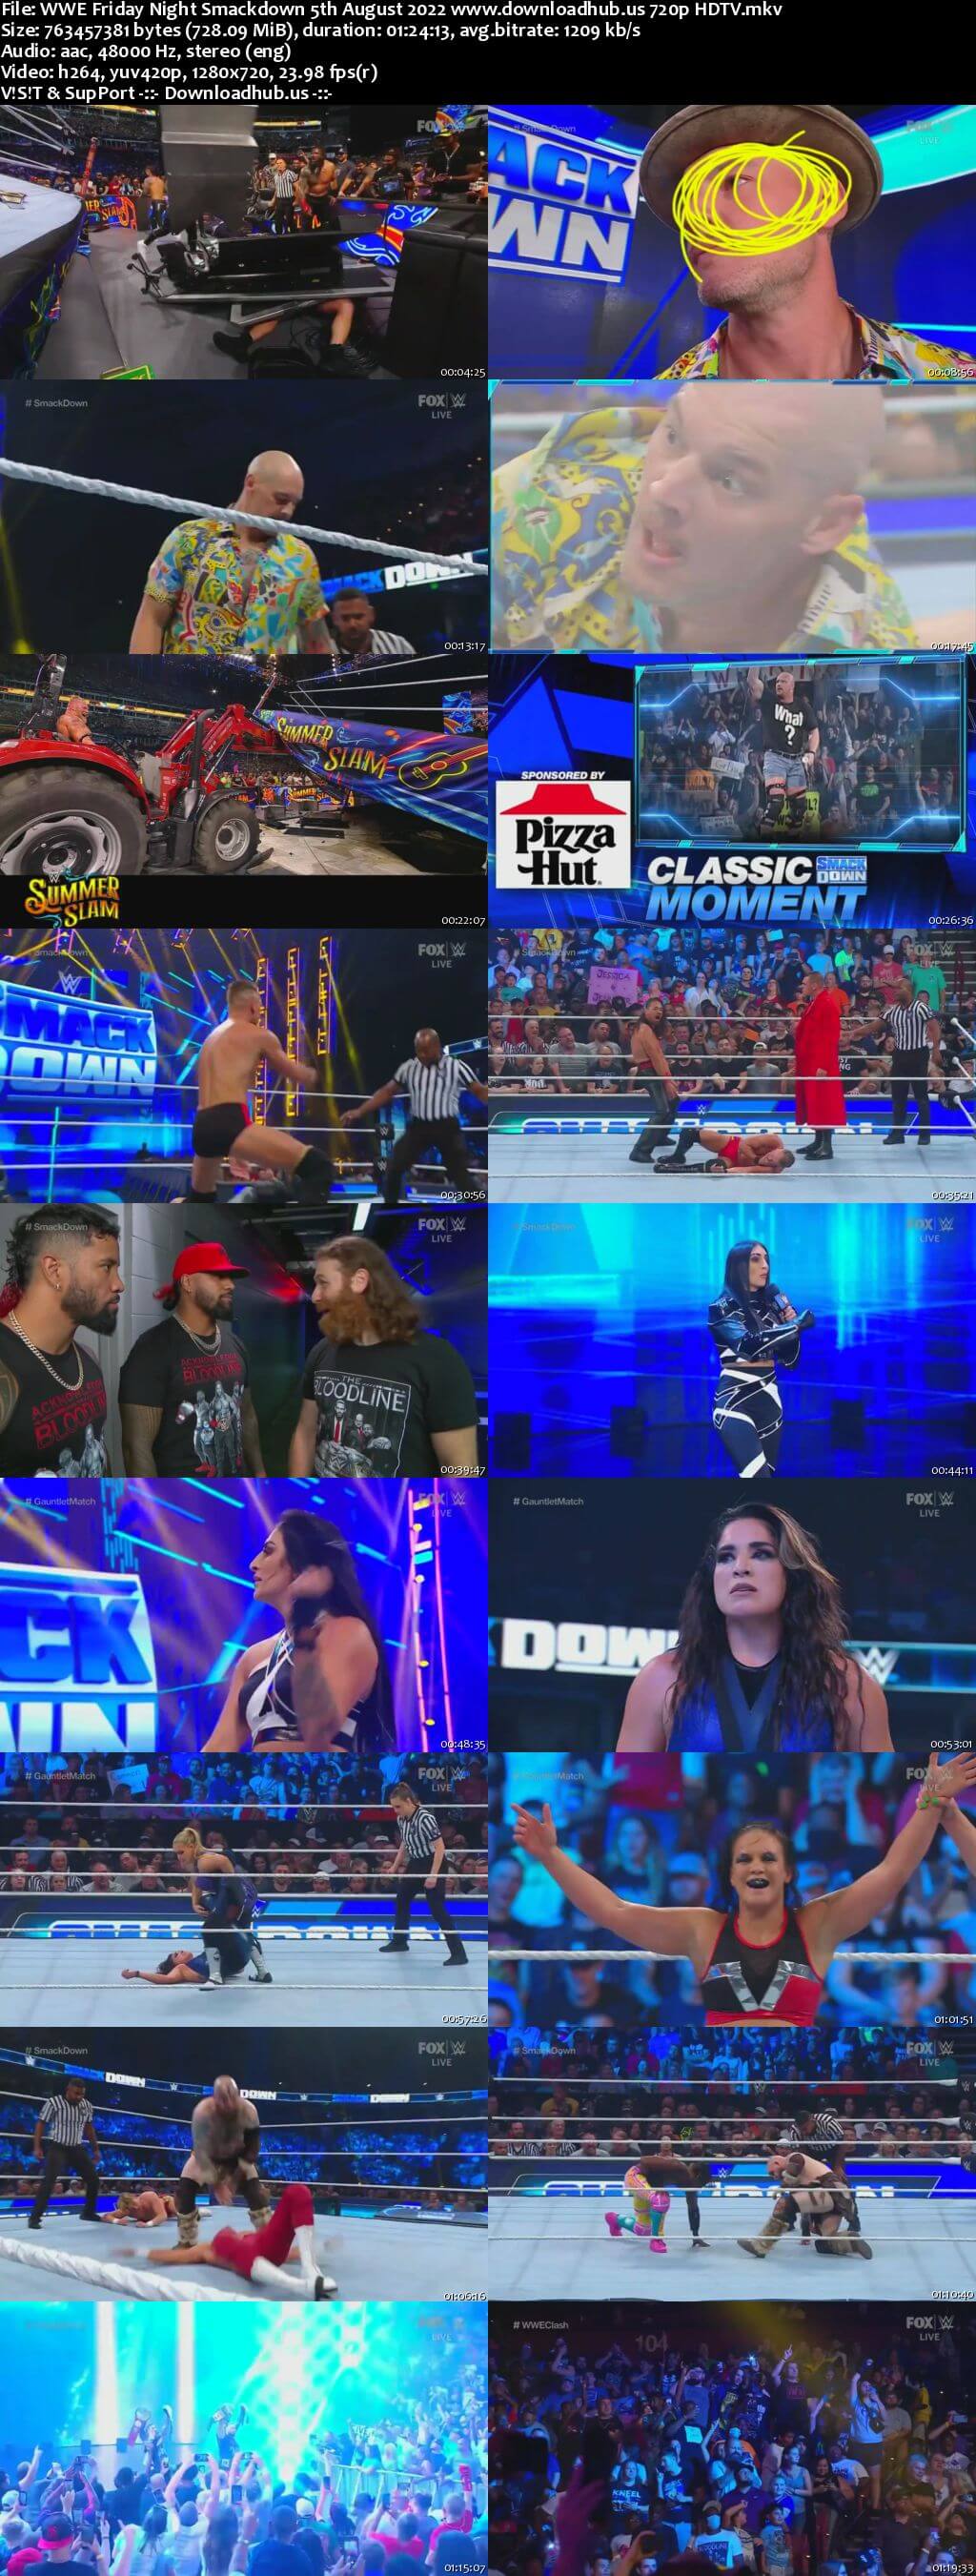 WWE Friday Night Smackdown 5th August 2022 720p 350MB HDTV 480p